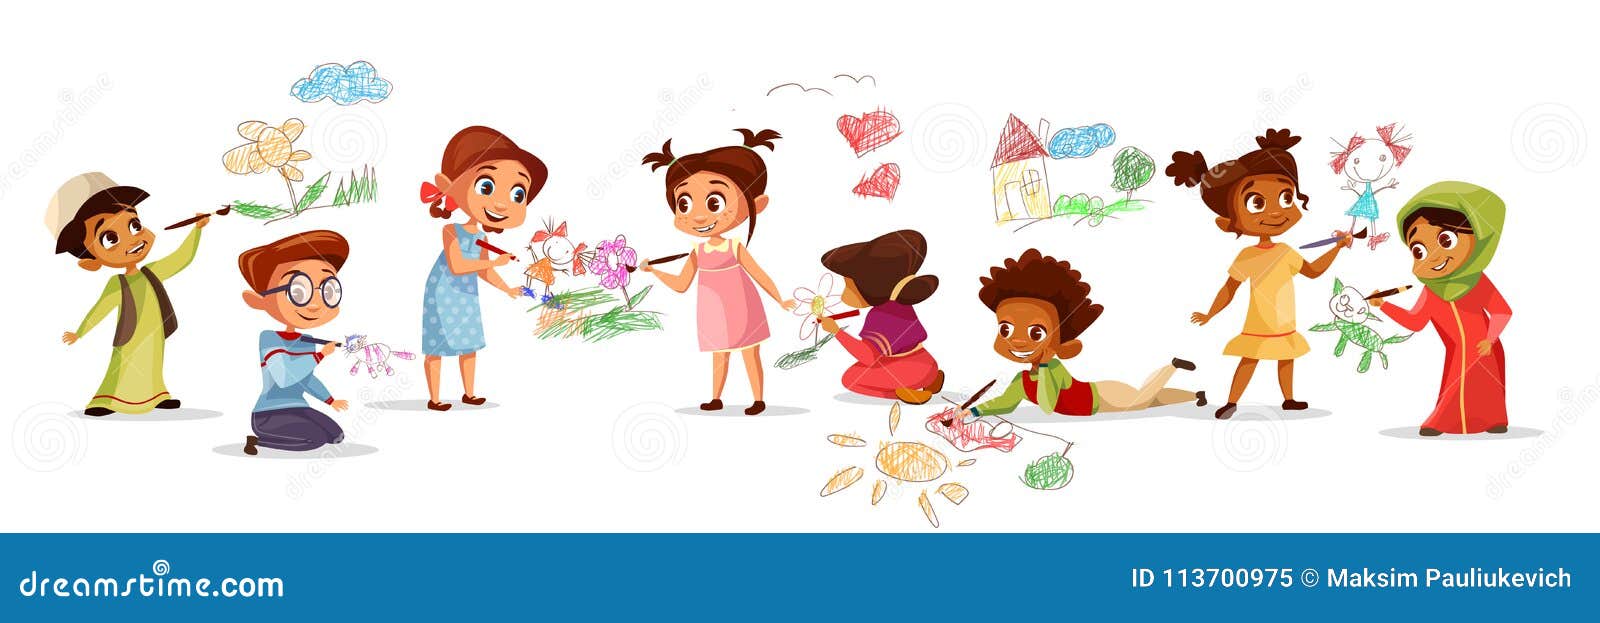 children drawing with pencils   of different nationality cartoon boys and girls kids painting with